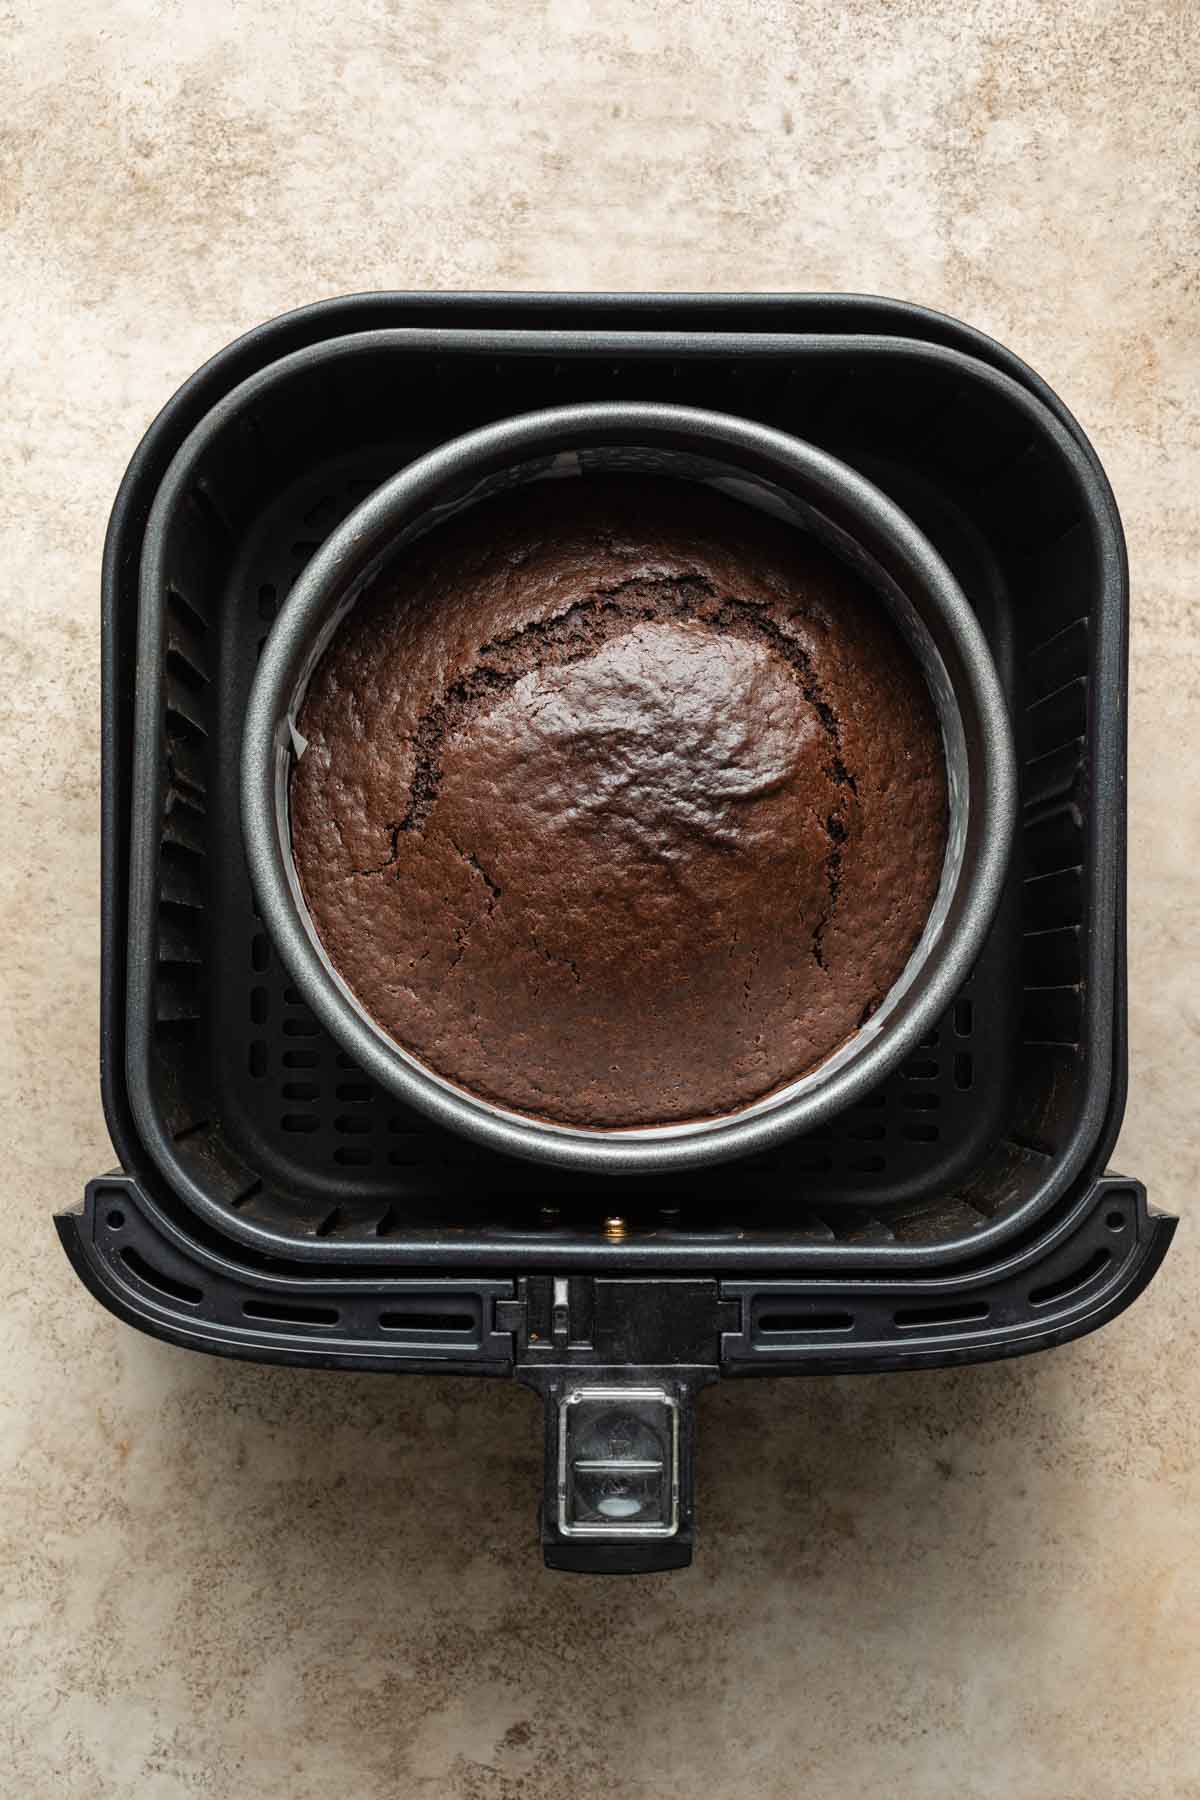 Overhead view of a baked chocolate cake in a round pan inside an air fryer basket.